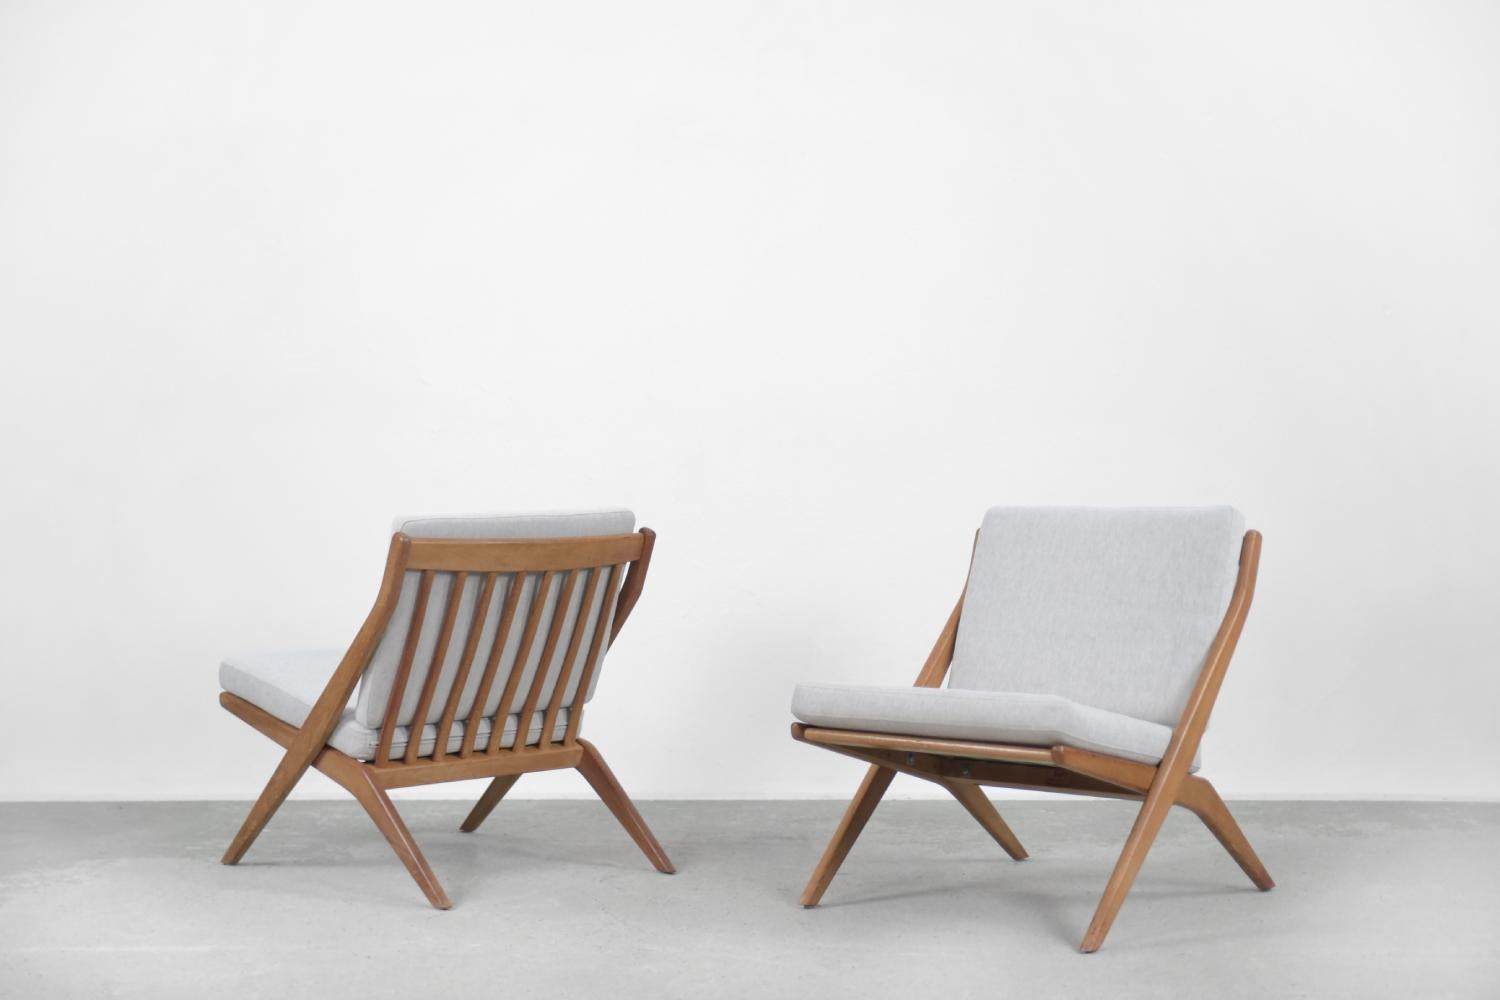 This Scissors armchair set of two was designed by Folke Ohlsson for the Swedish manufacturer Bodafors in 1962. It has a scissor oak frame with eight slats on the backrest. The loose cushions have been re-upholstered in a high-quality gray textured